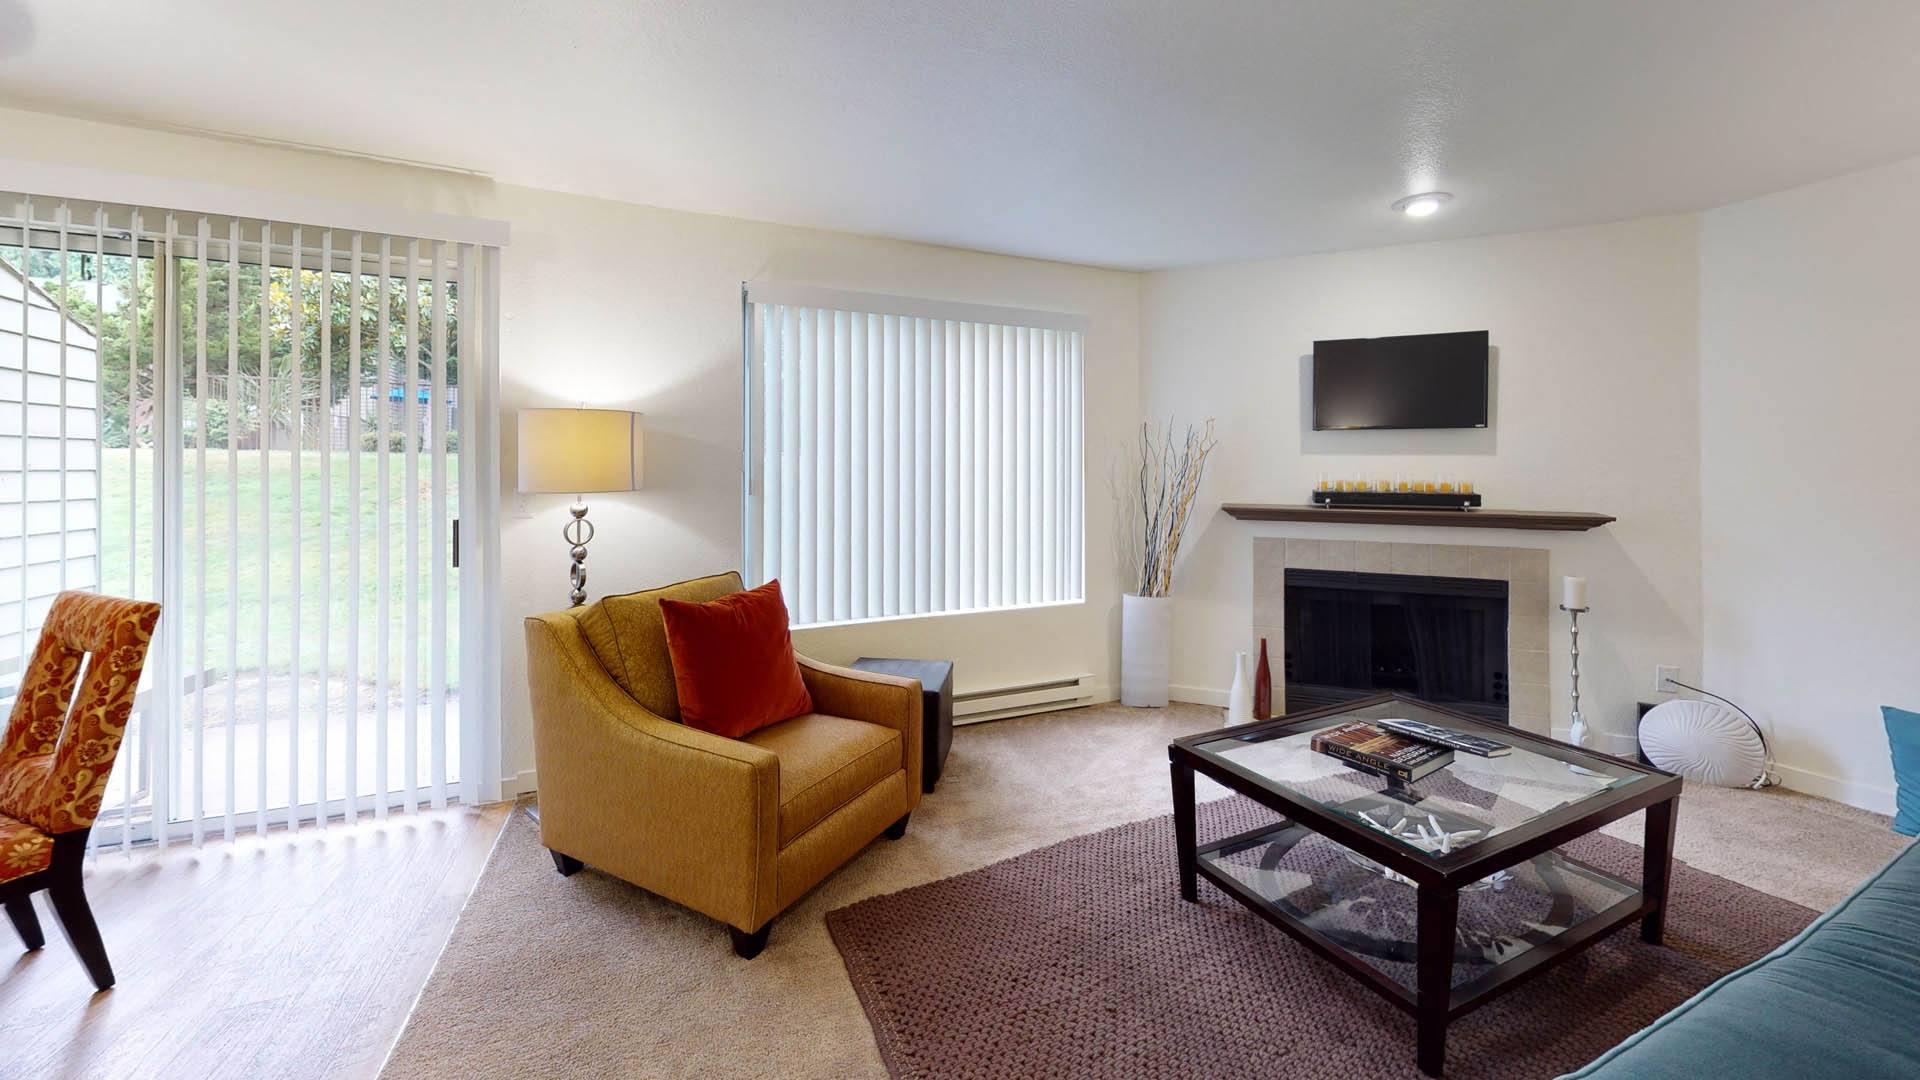 Living room with TV at North Creek Apartments, Everett